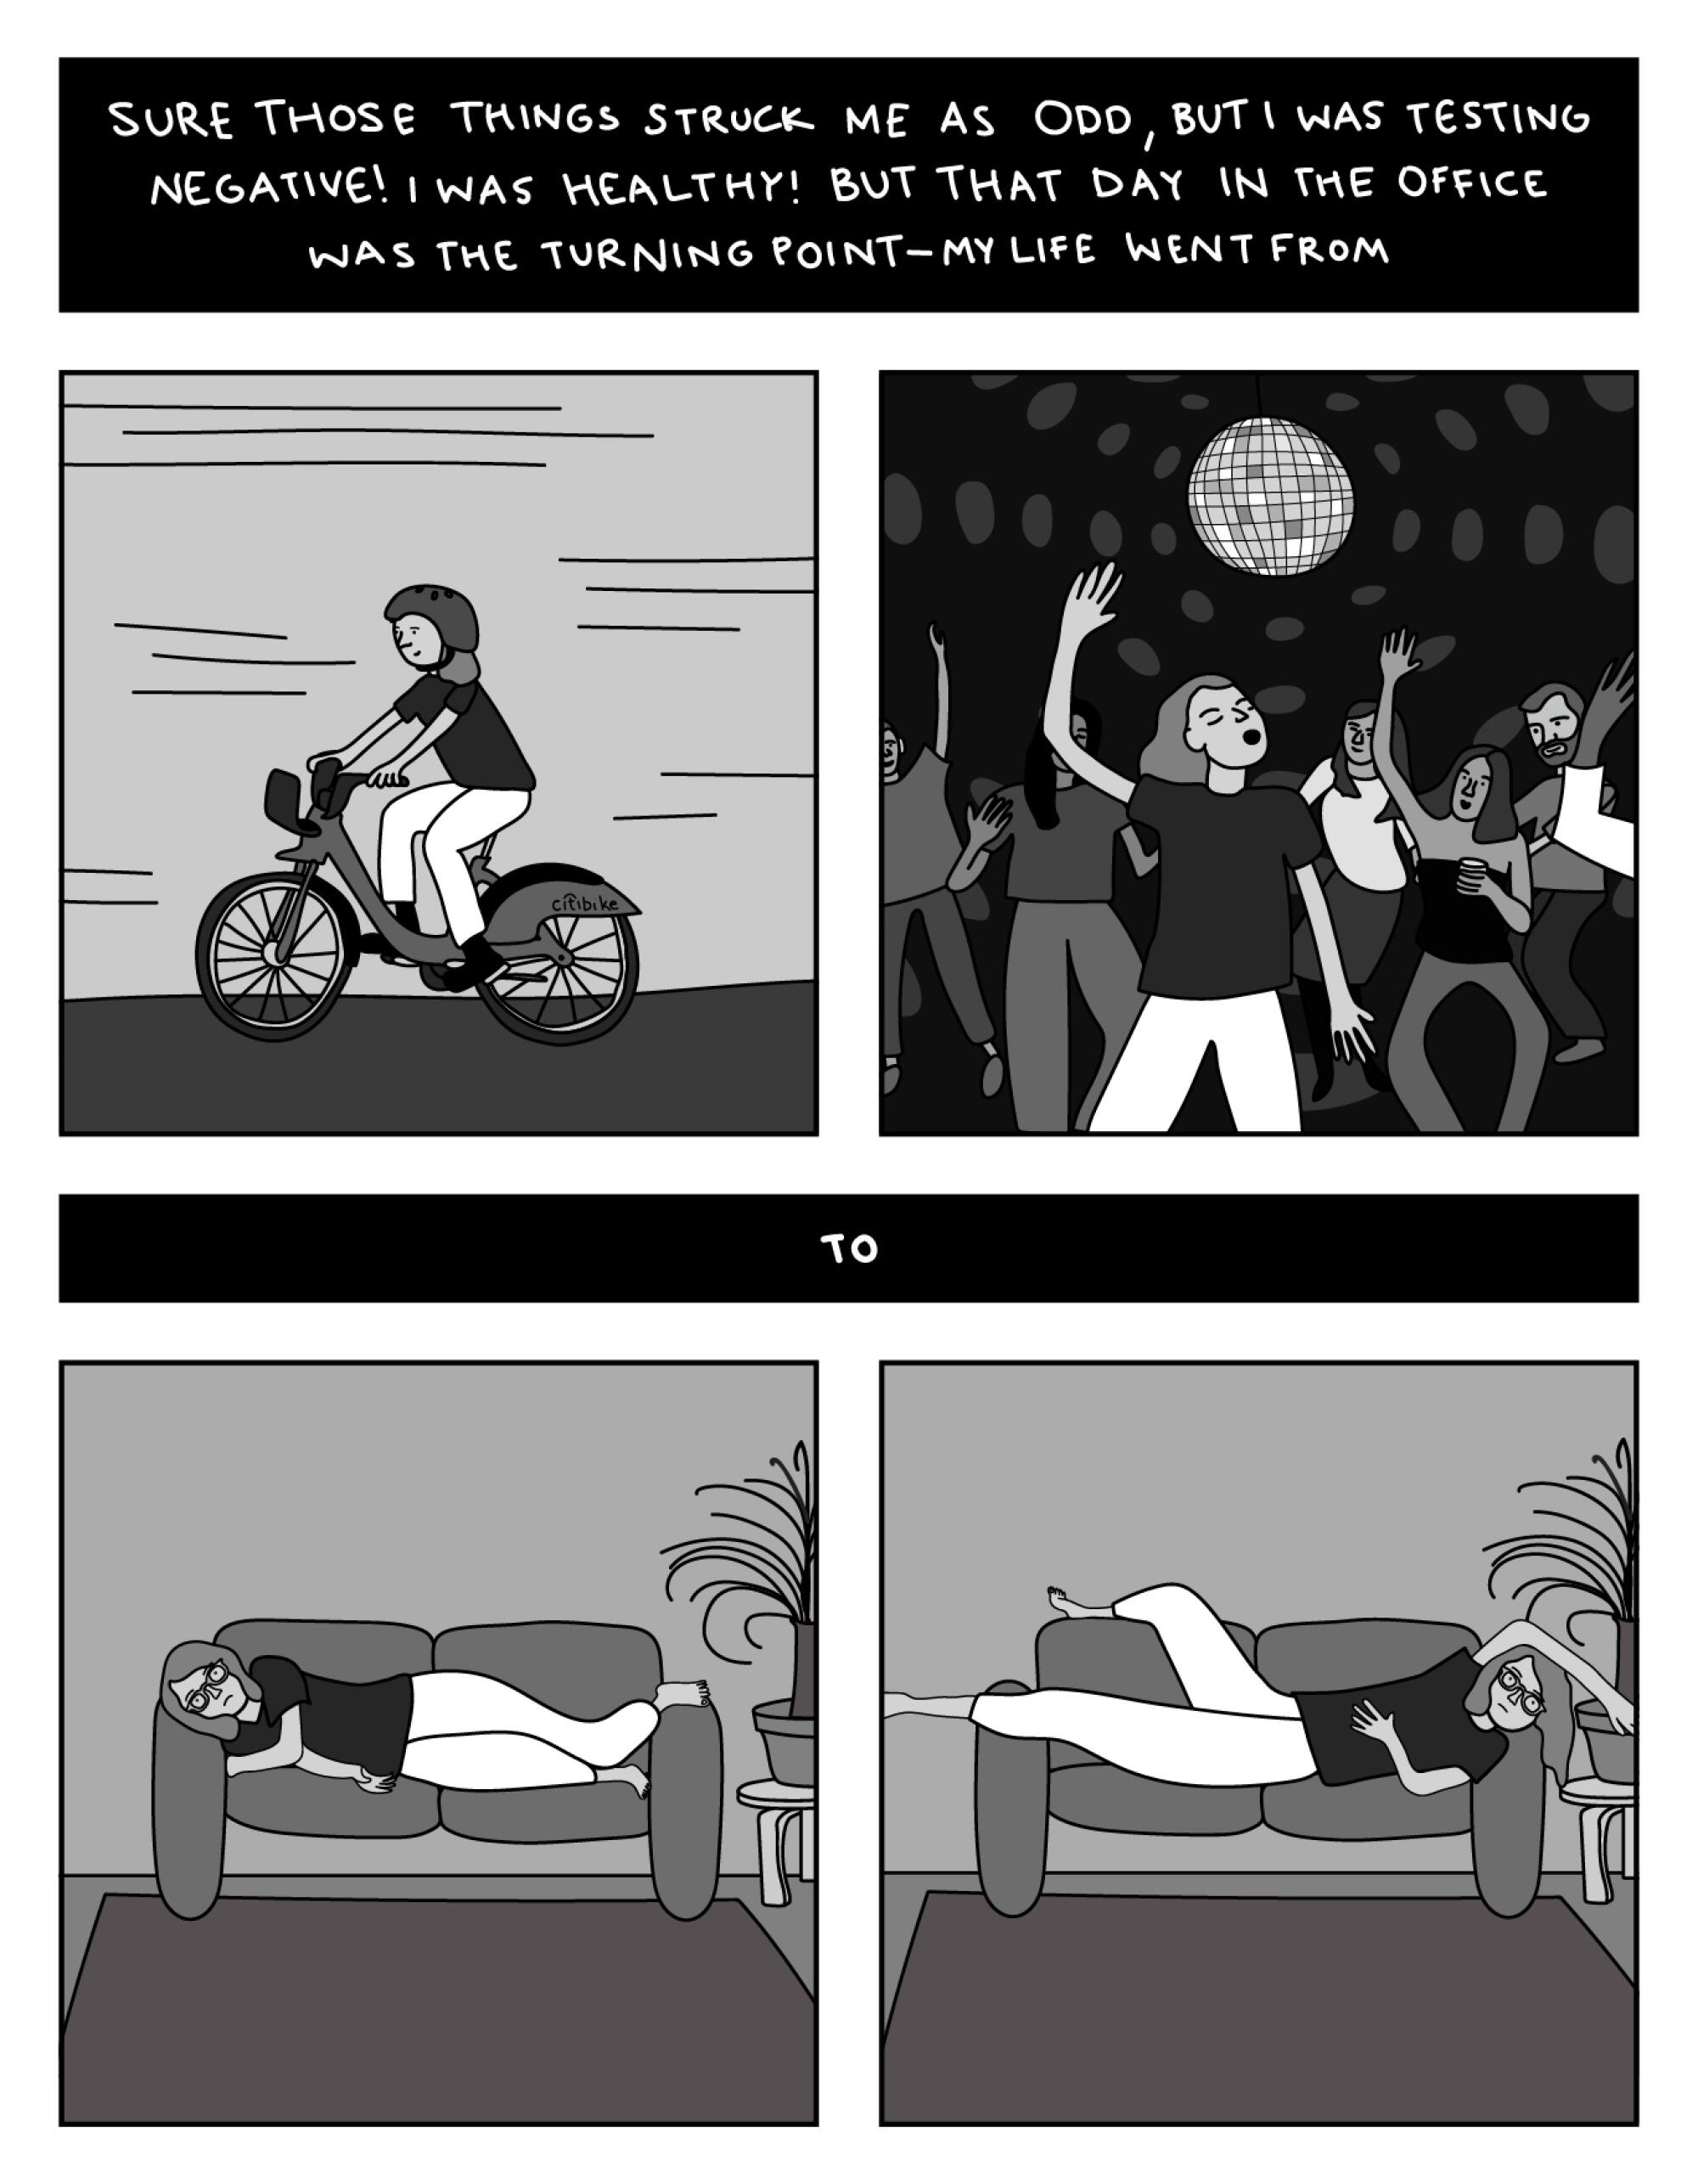 My life went from [panels: woman biking; woman dancing] to [panels: woman lying on couch].